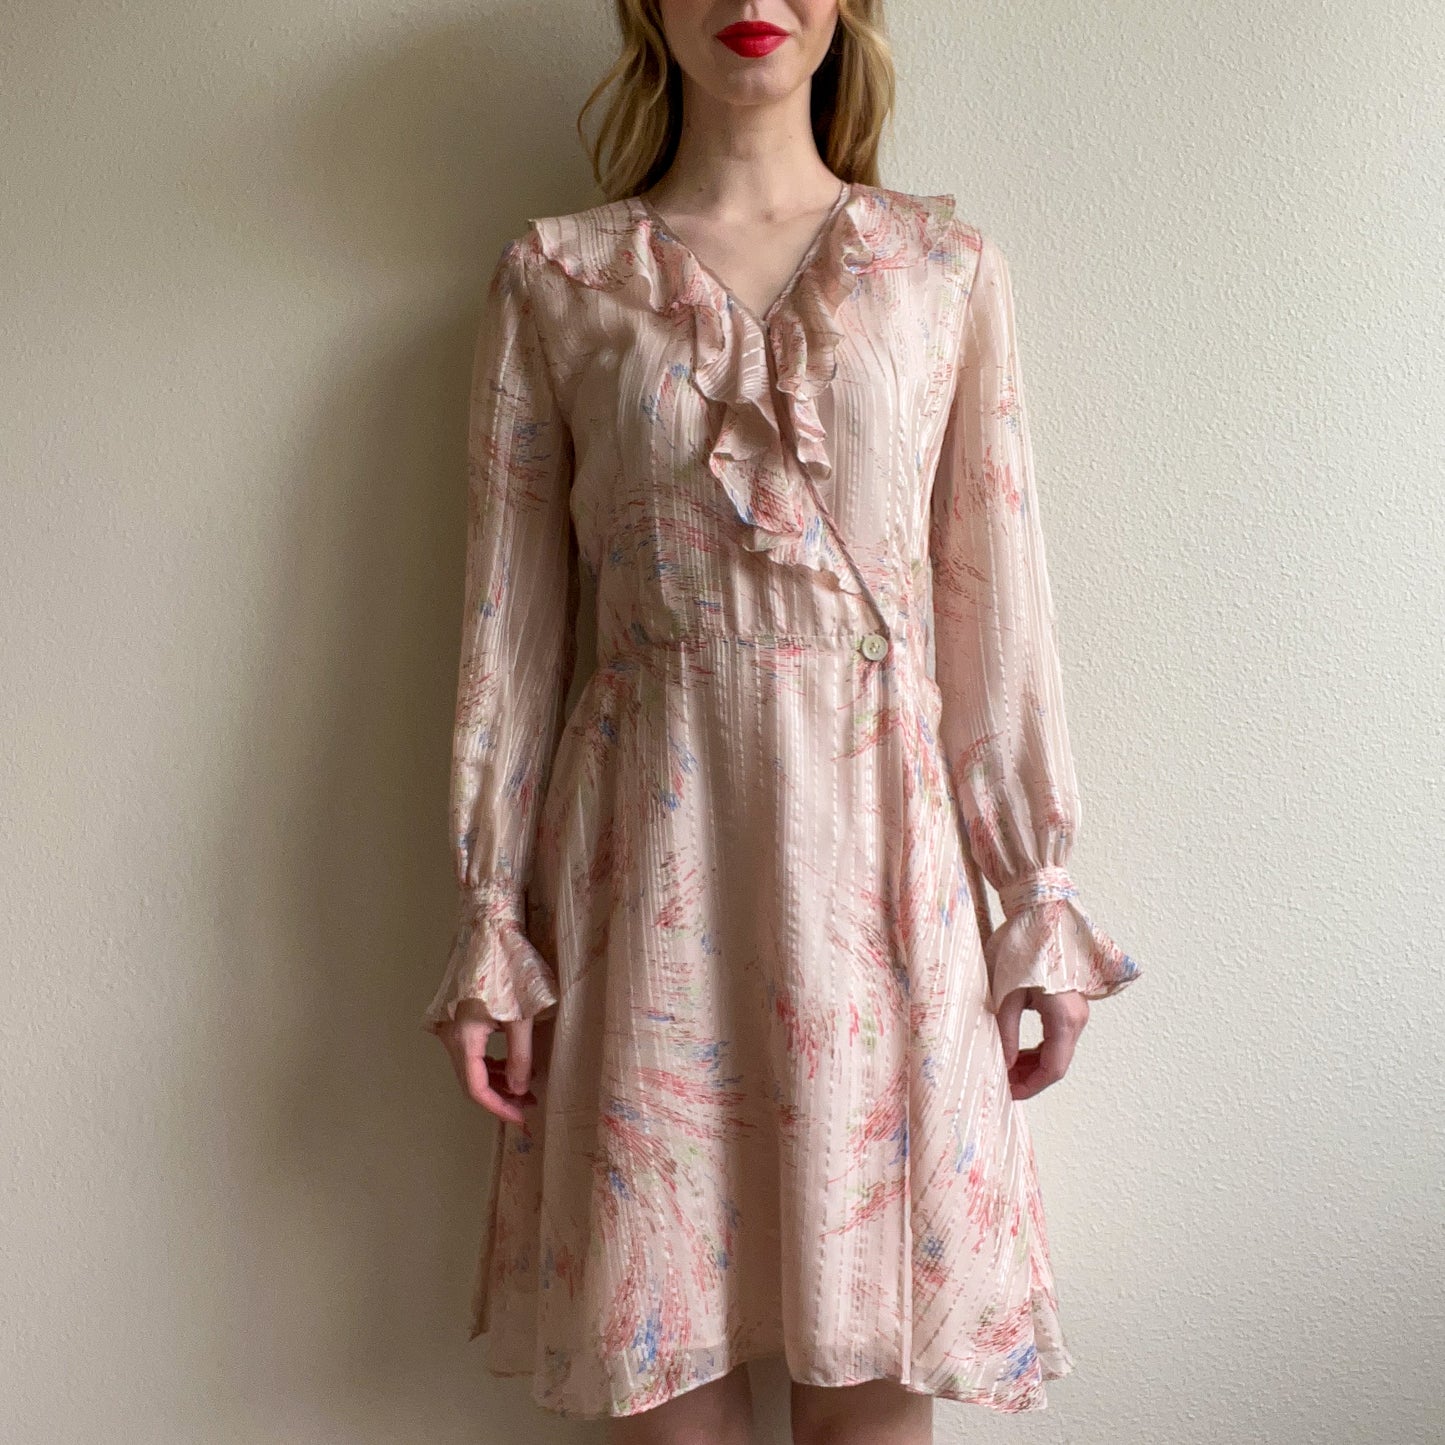 Vintage Ruffled Wrap Dress With Abstract Print (M)